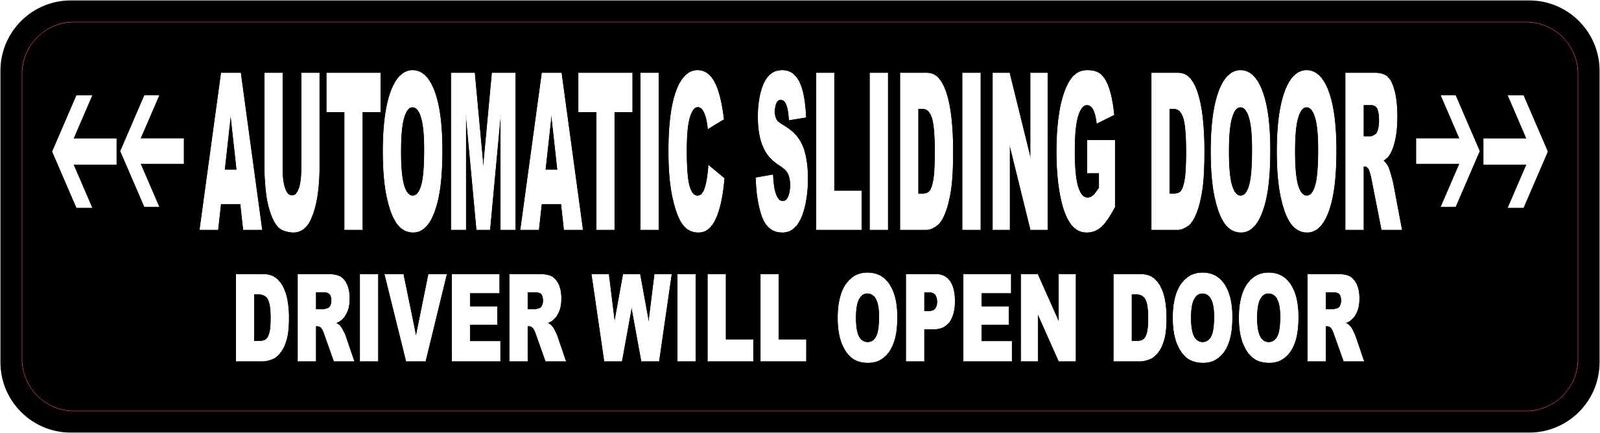 8in x 2in Driver Will Open Automatic Sliding Door Sticker Vehicle Bumper Decal